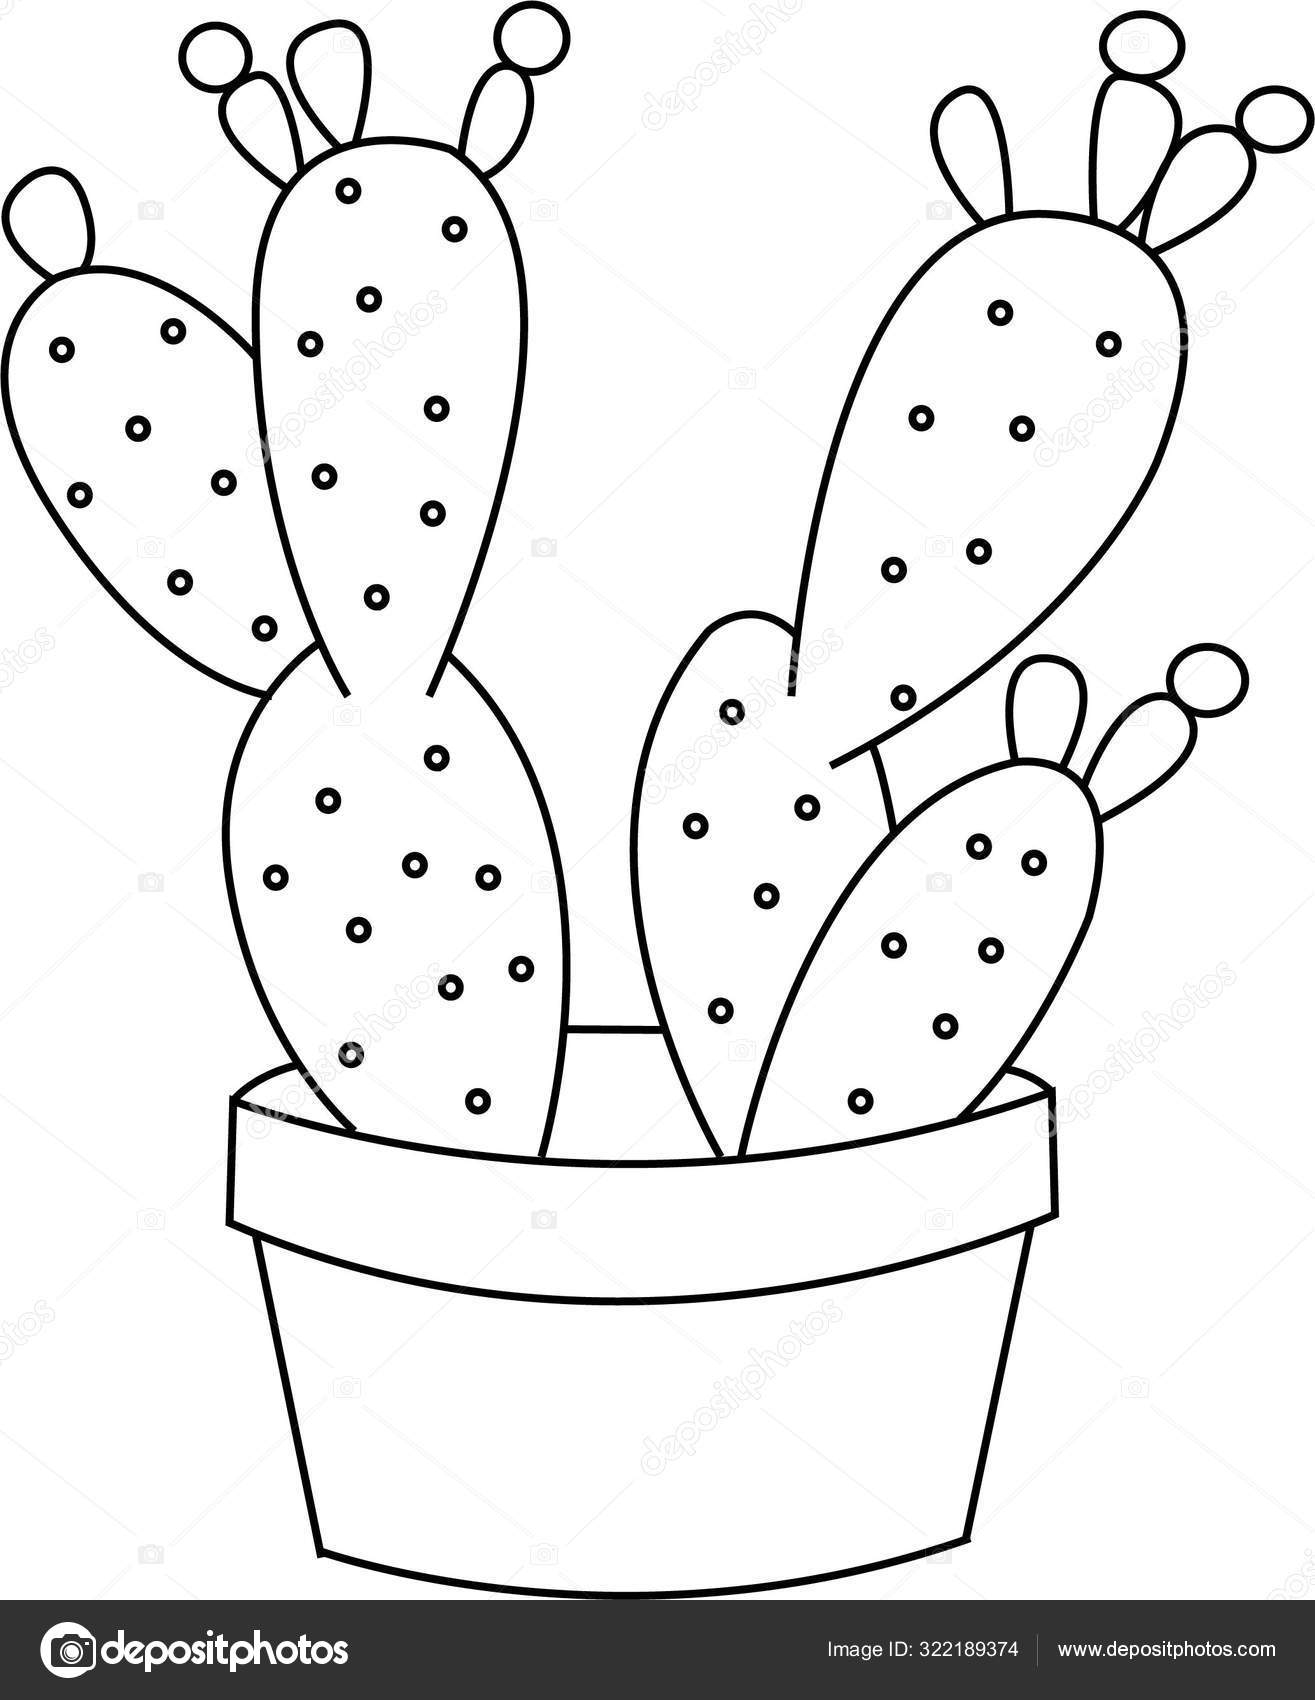 Cactus vector outline isolated sketch stress coloring page tattoo poster stock vector by dysavdysa